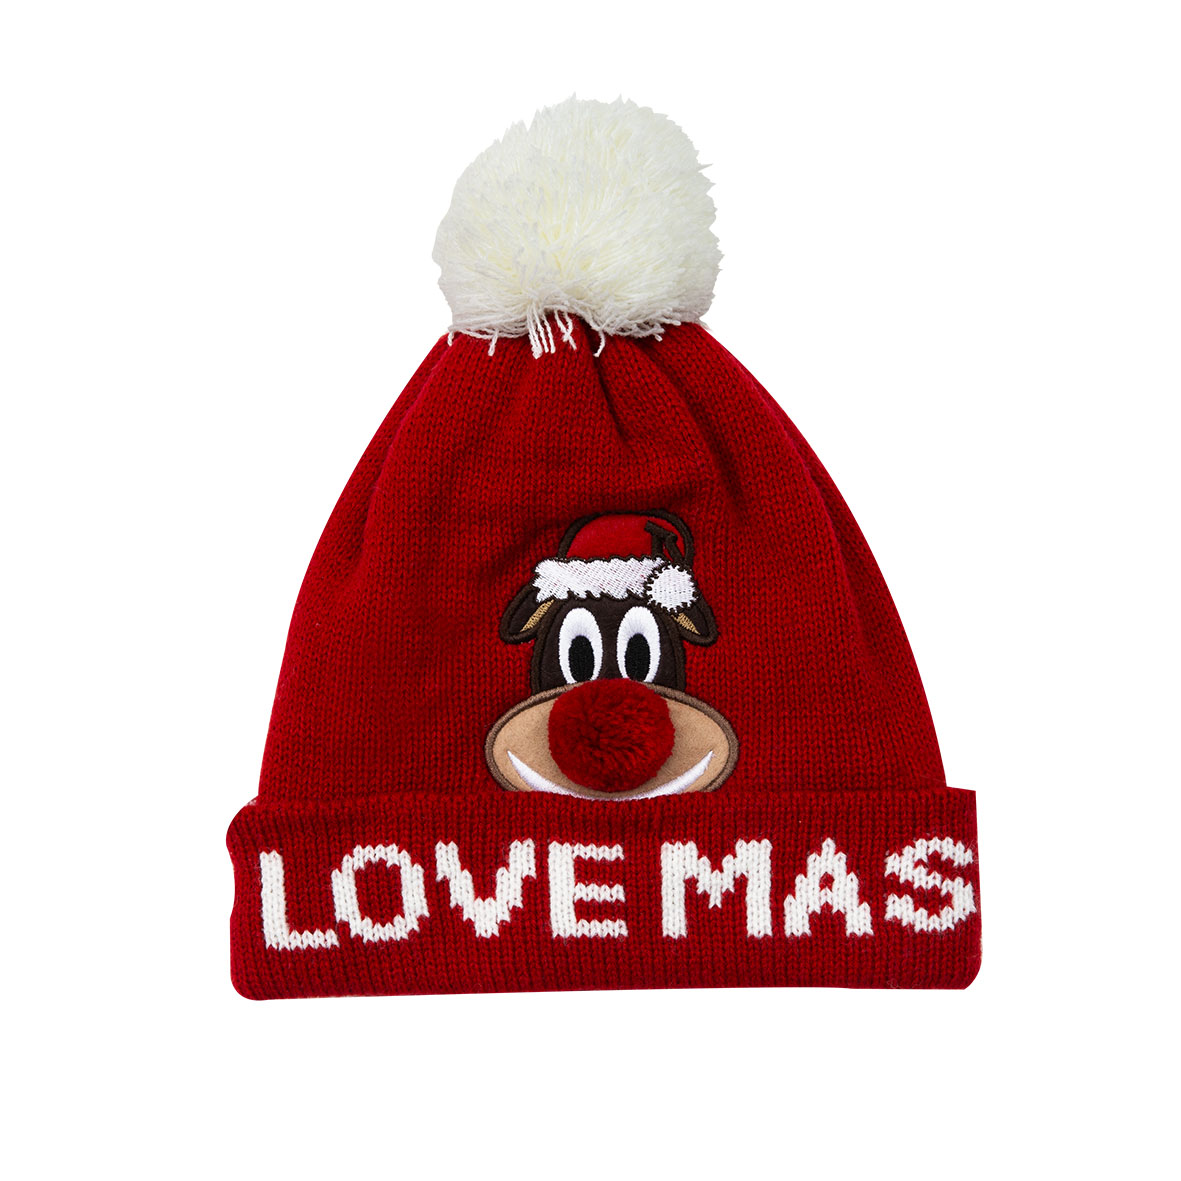 Mawi cappello tricot natale kid girl - Mawi